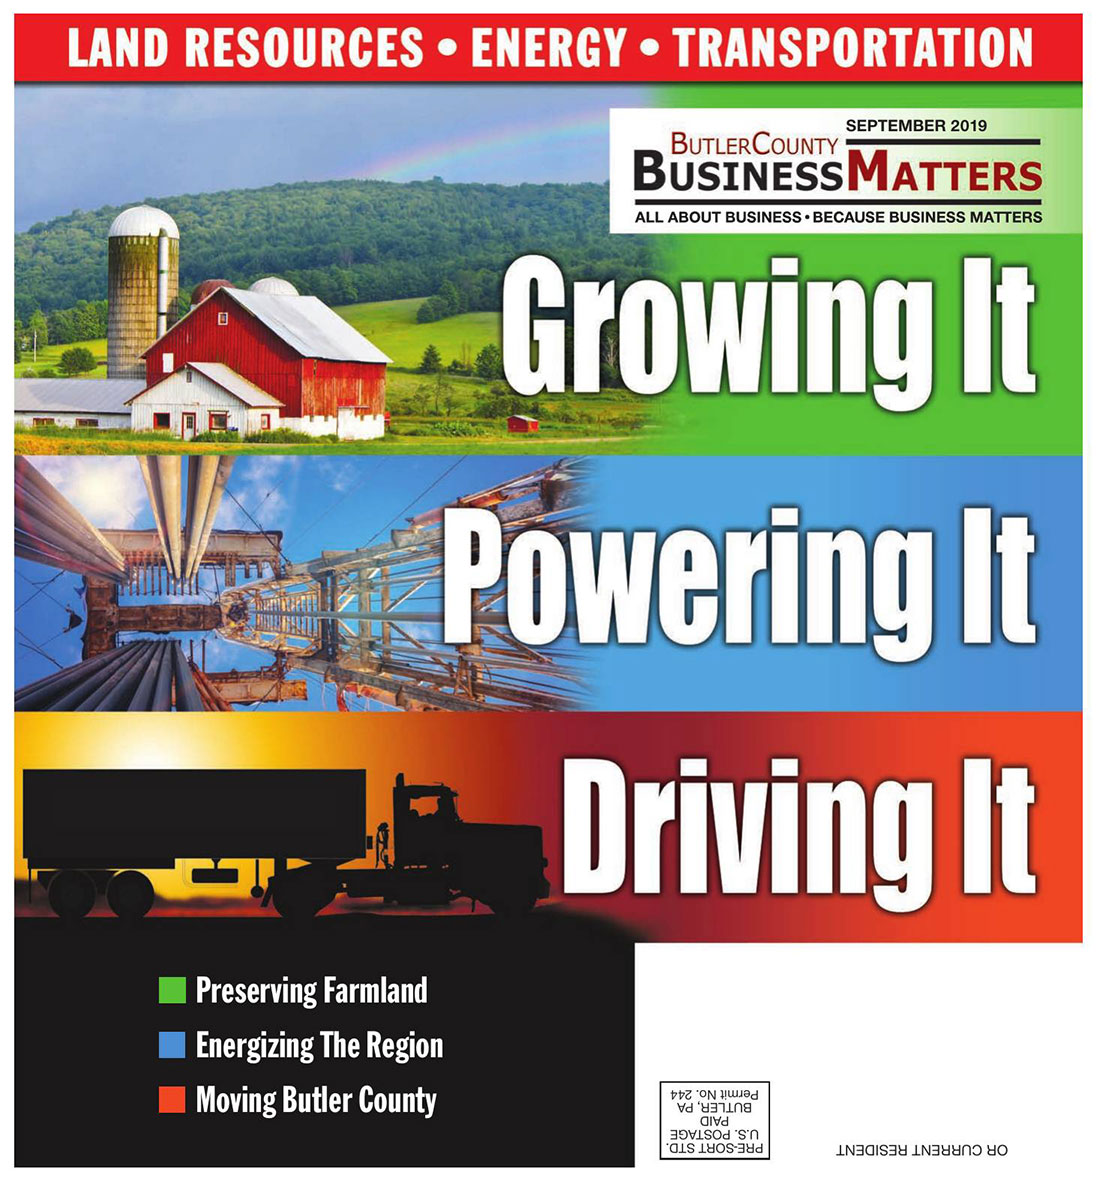 September 2019 - Land Resources, Energy, Transportation - Growing It, Powering It, Driving It